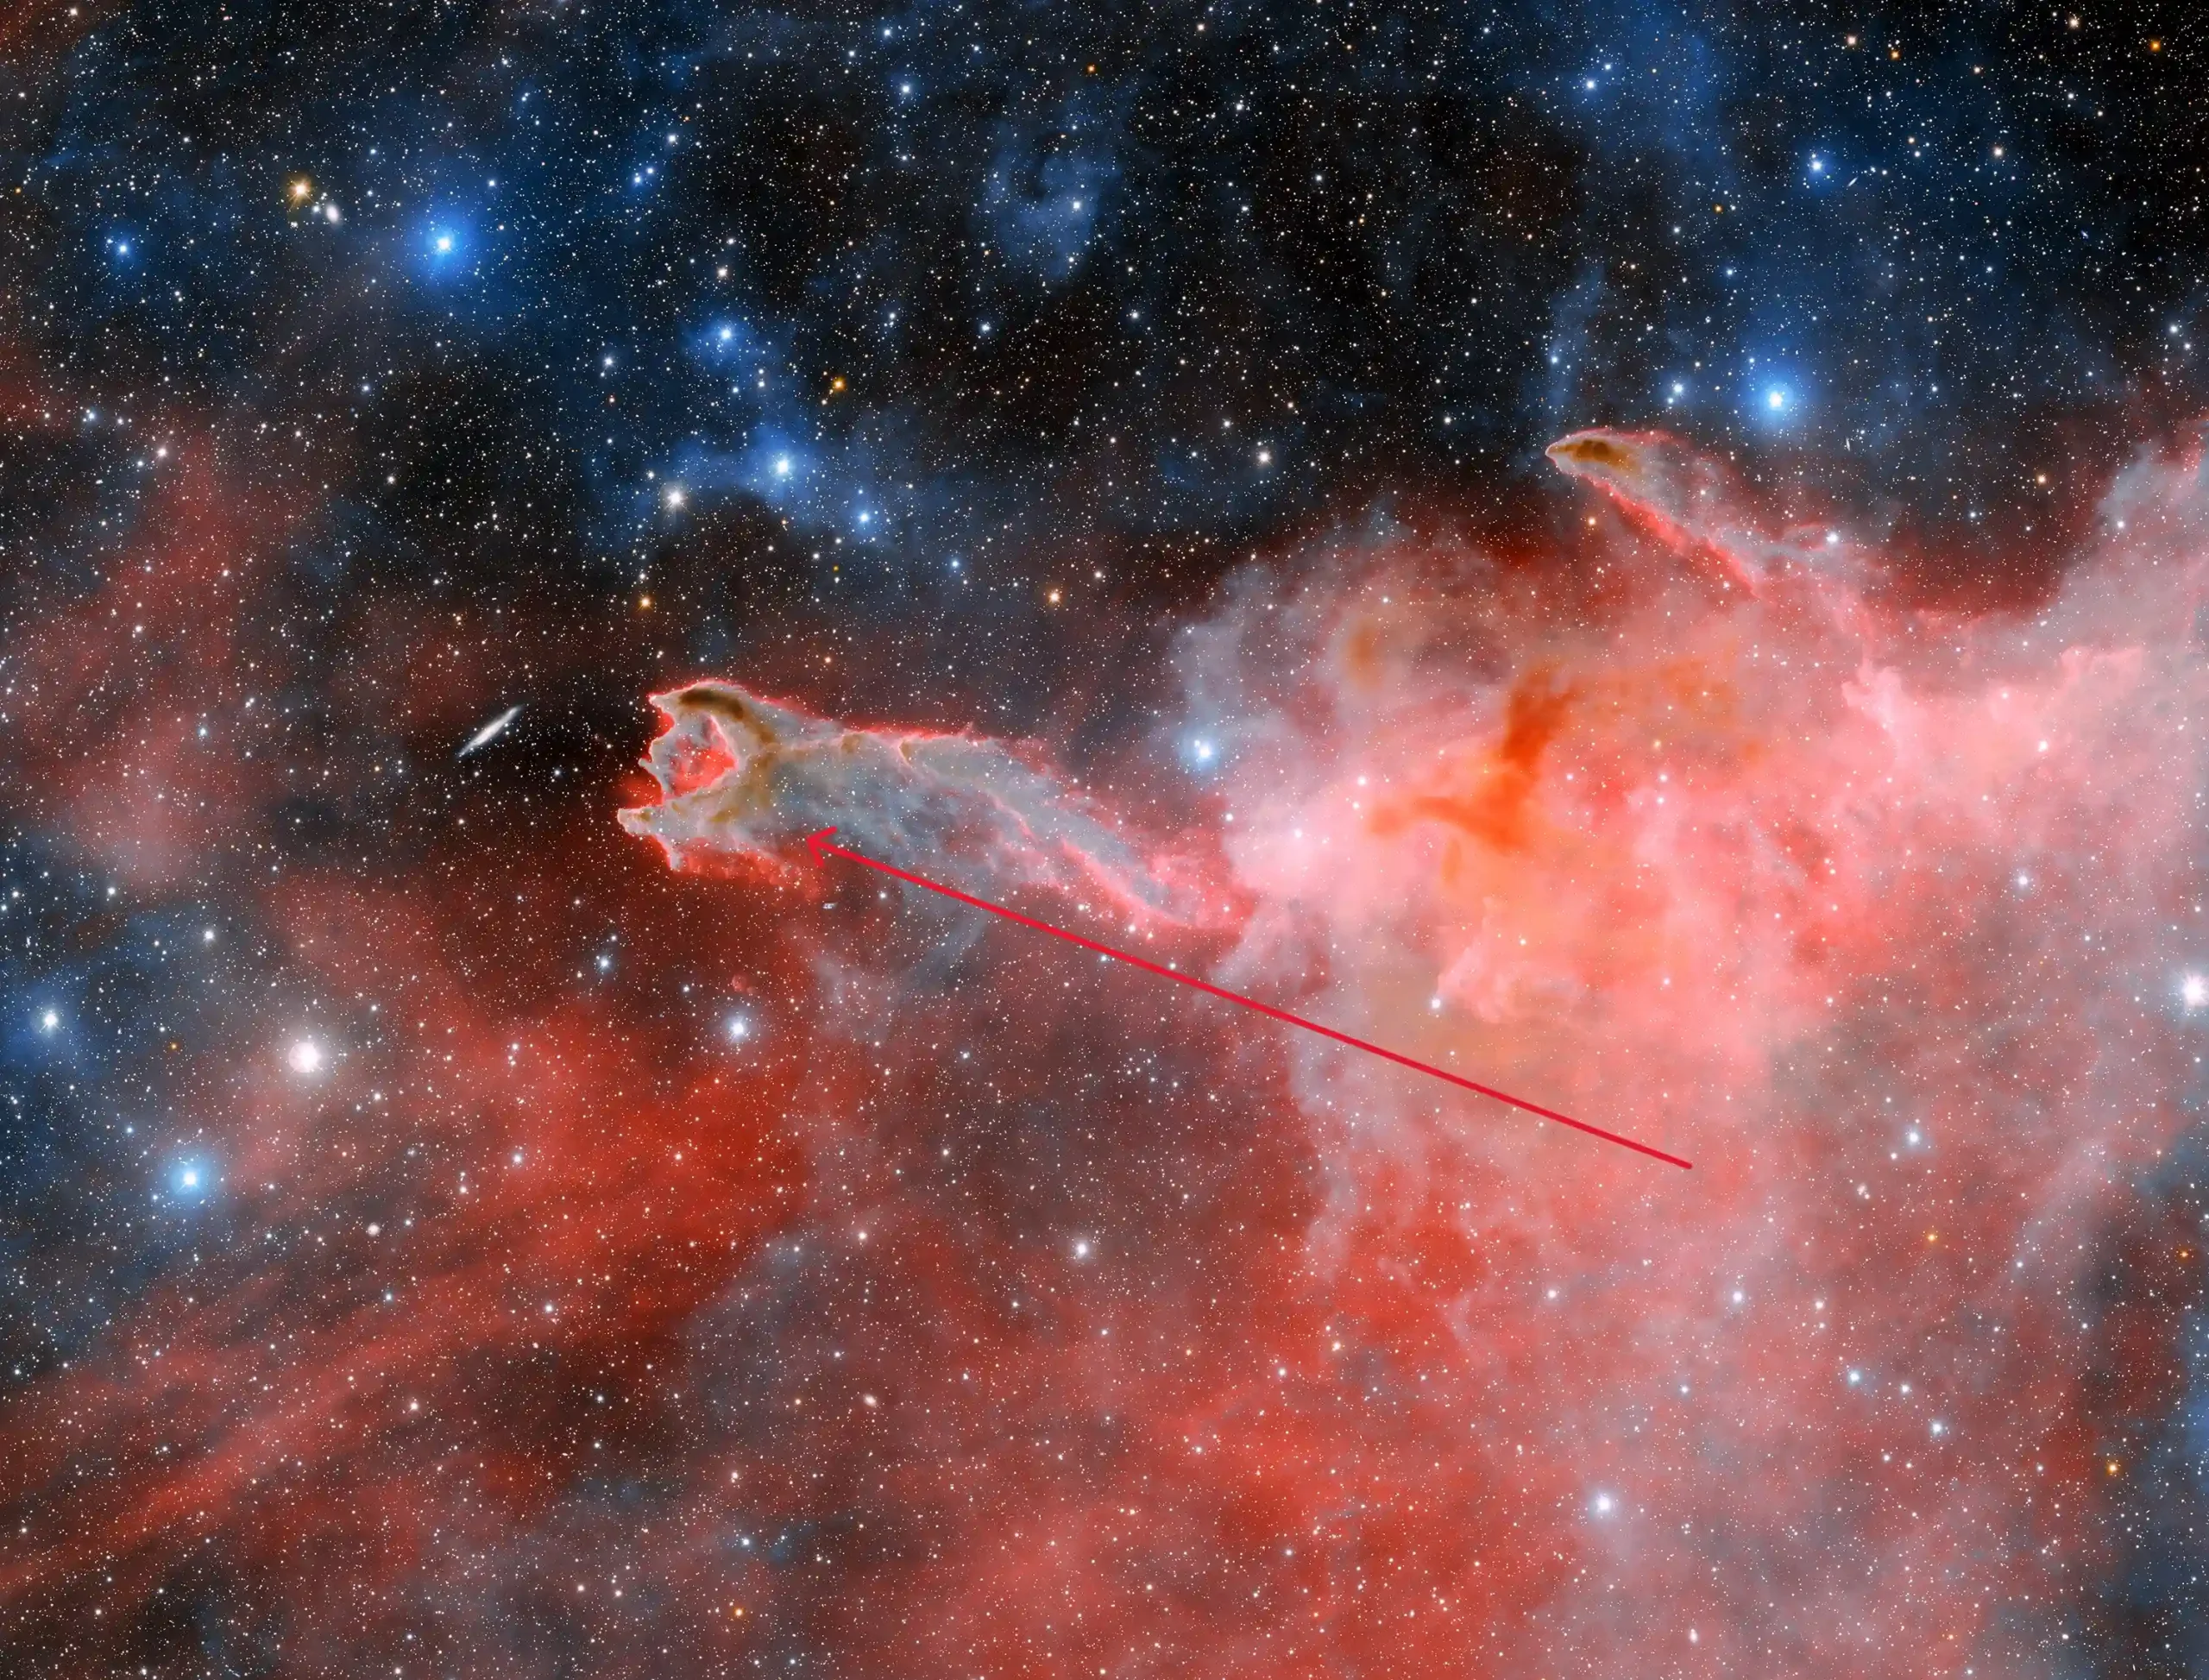 A striking celestial sight: astronomers capture images of a ghostly 'hand' stretching through space, 1,300 light years away in the constellation 'Puppis'. This cometary globule, named 'God's Hand', is a unique formation of dust and gas, sparking debate among researchers about its origins.